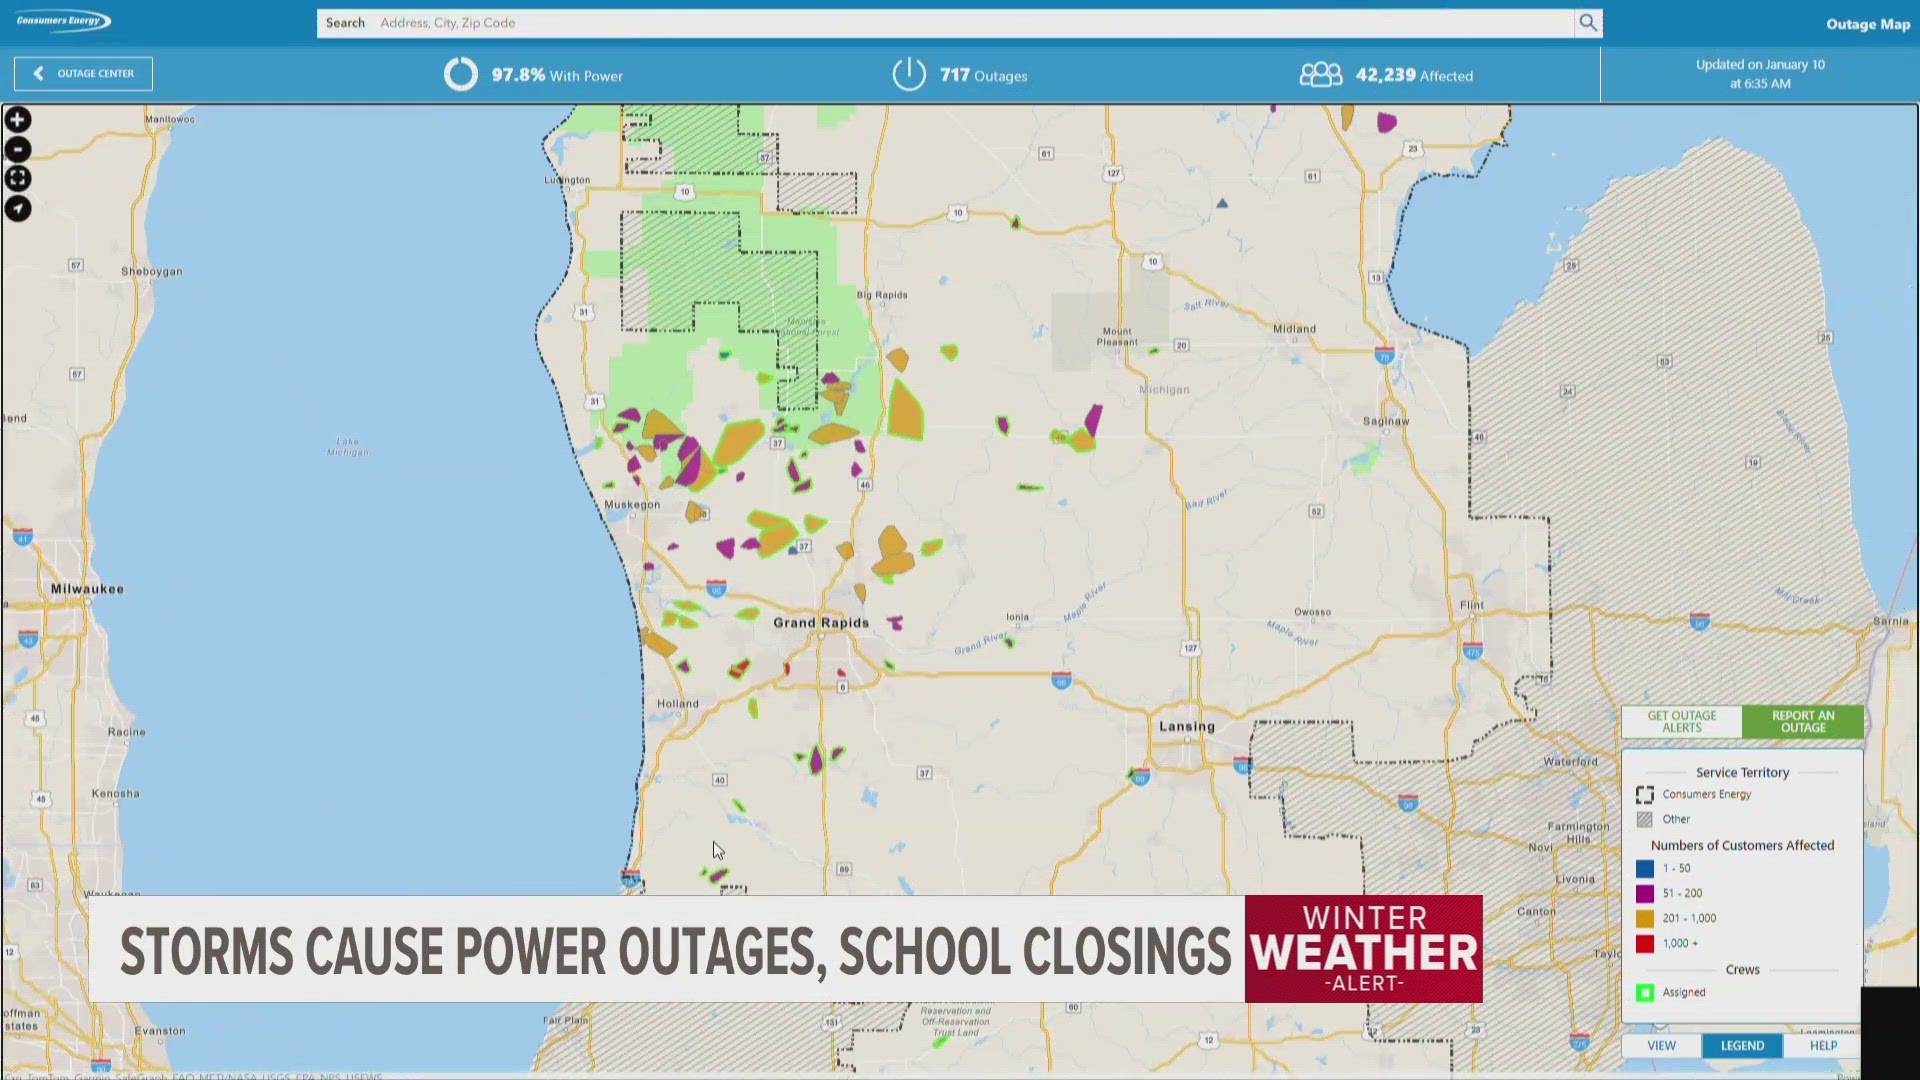 Thousands are without power Wednesday morning and many school districts have canceled classes in the aftermath of Tuesday's winter weather.